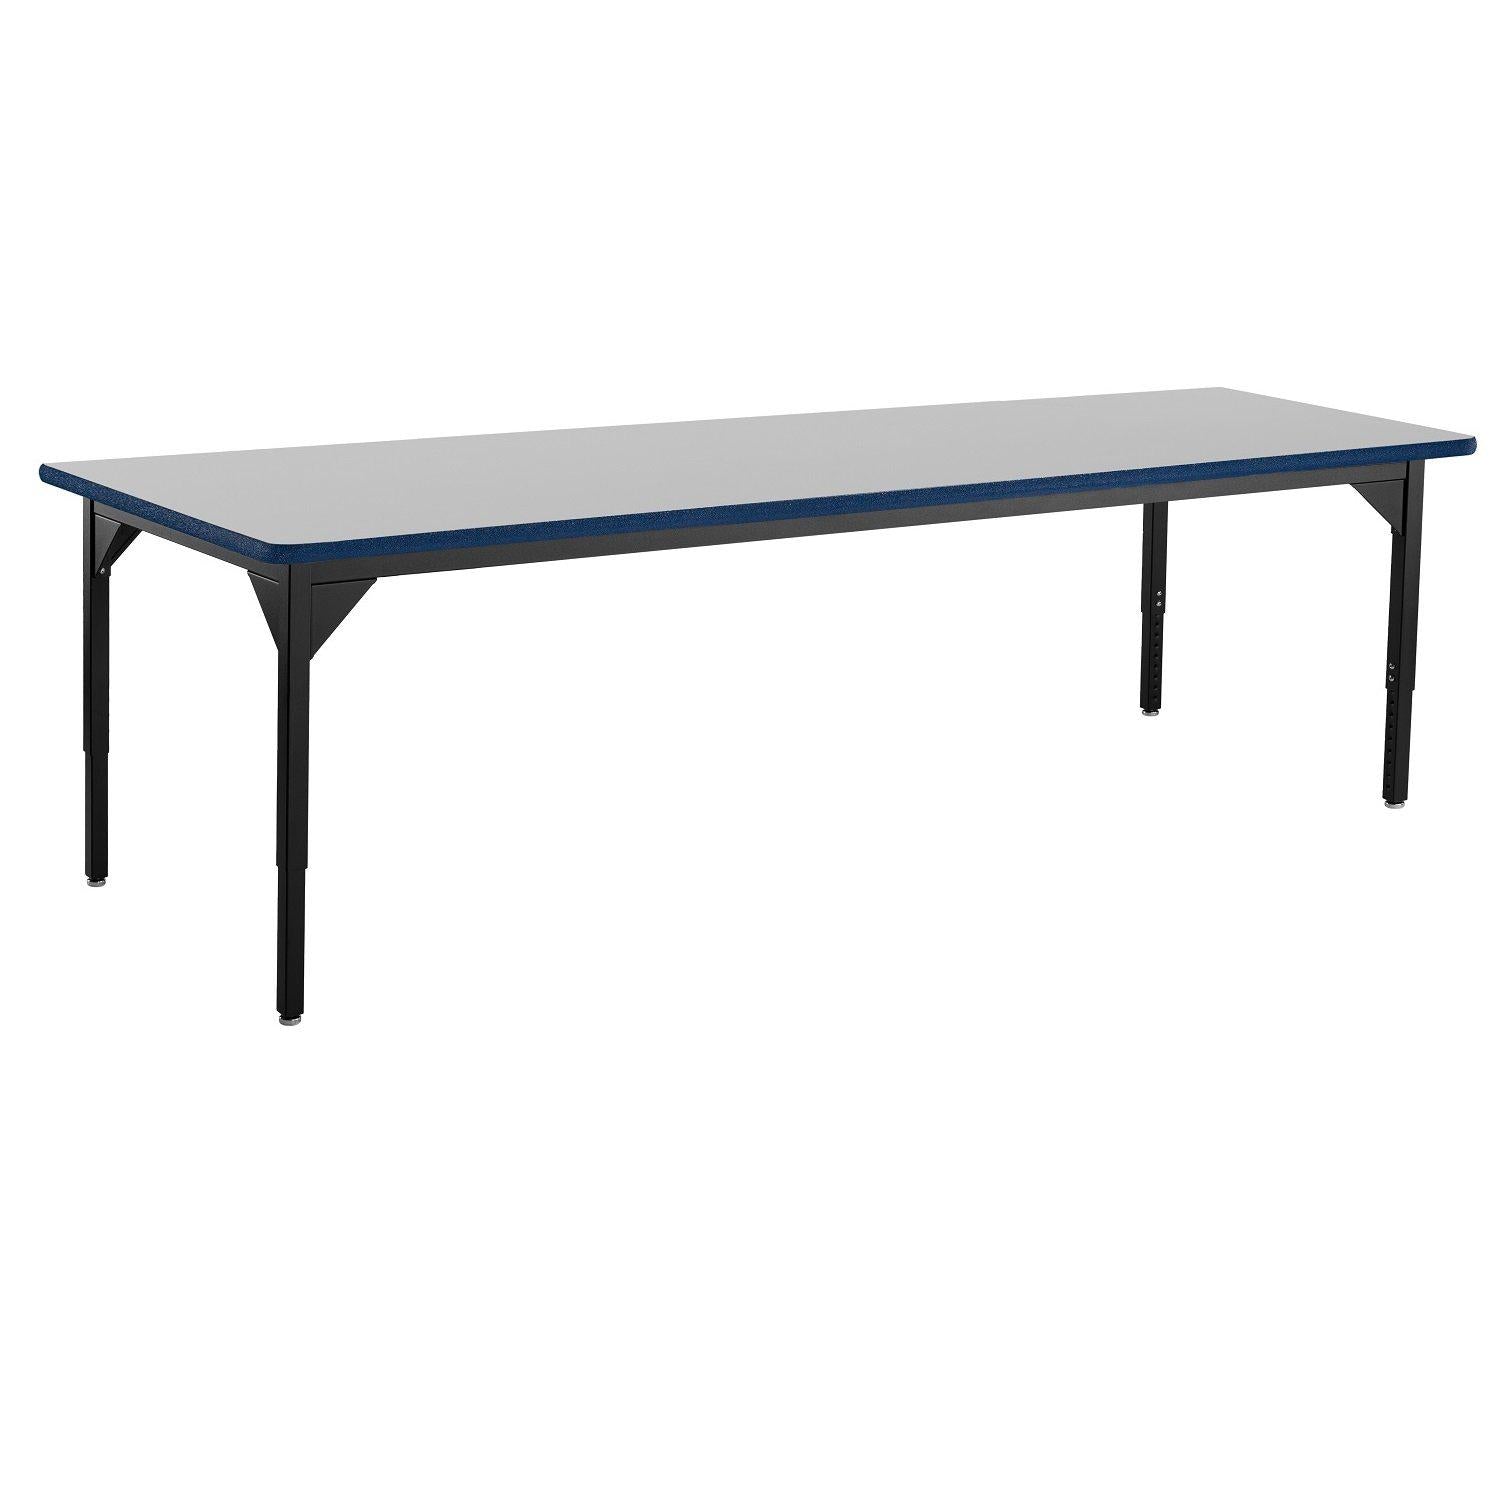 Heavy-Duty Height-Adjustable Utility Table, Black Frame, 36" x 72", Supreme High-Pressure Laminate Top with Black ProtectEdge